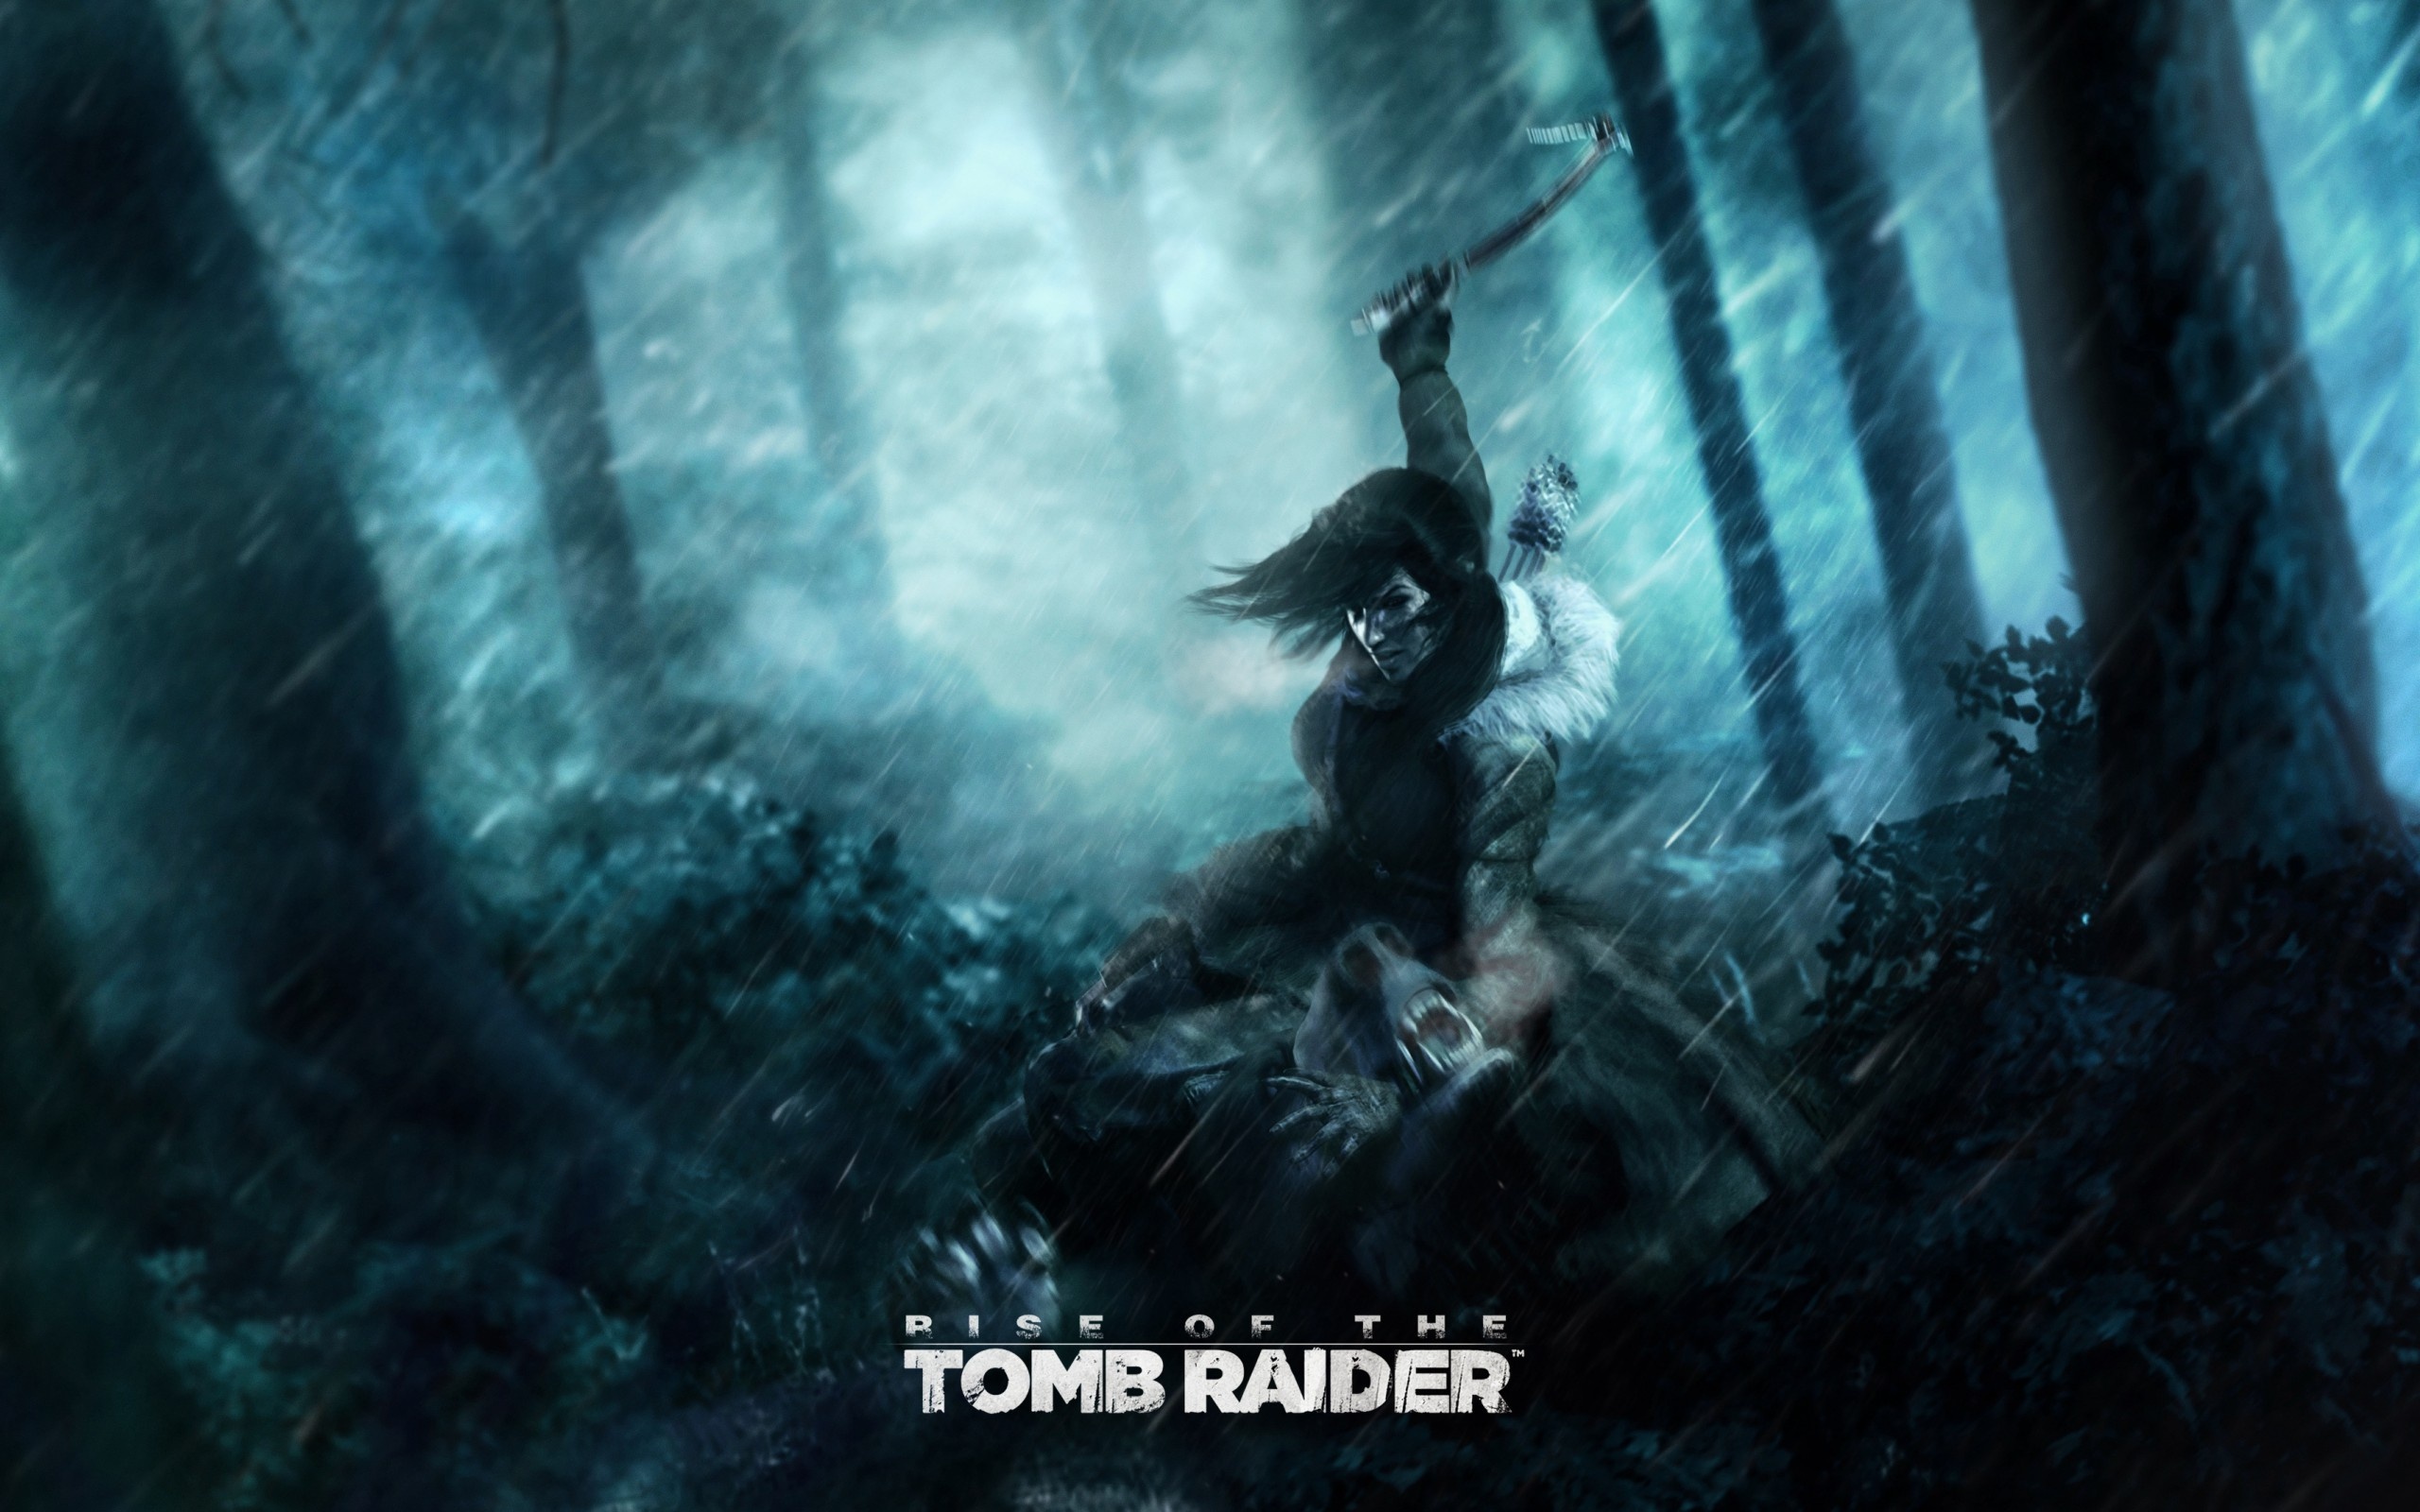 Rise of the Tomb Raider, Desktop wallpapers, Background images, 2560x1600 HD Desktop